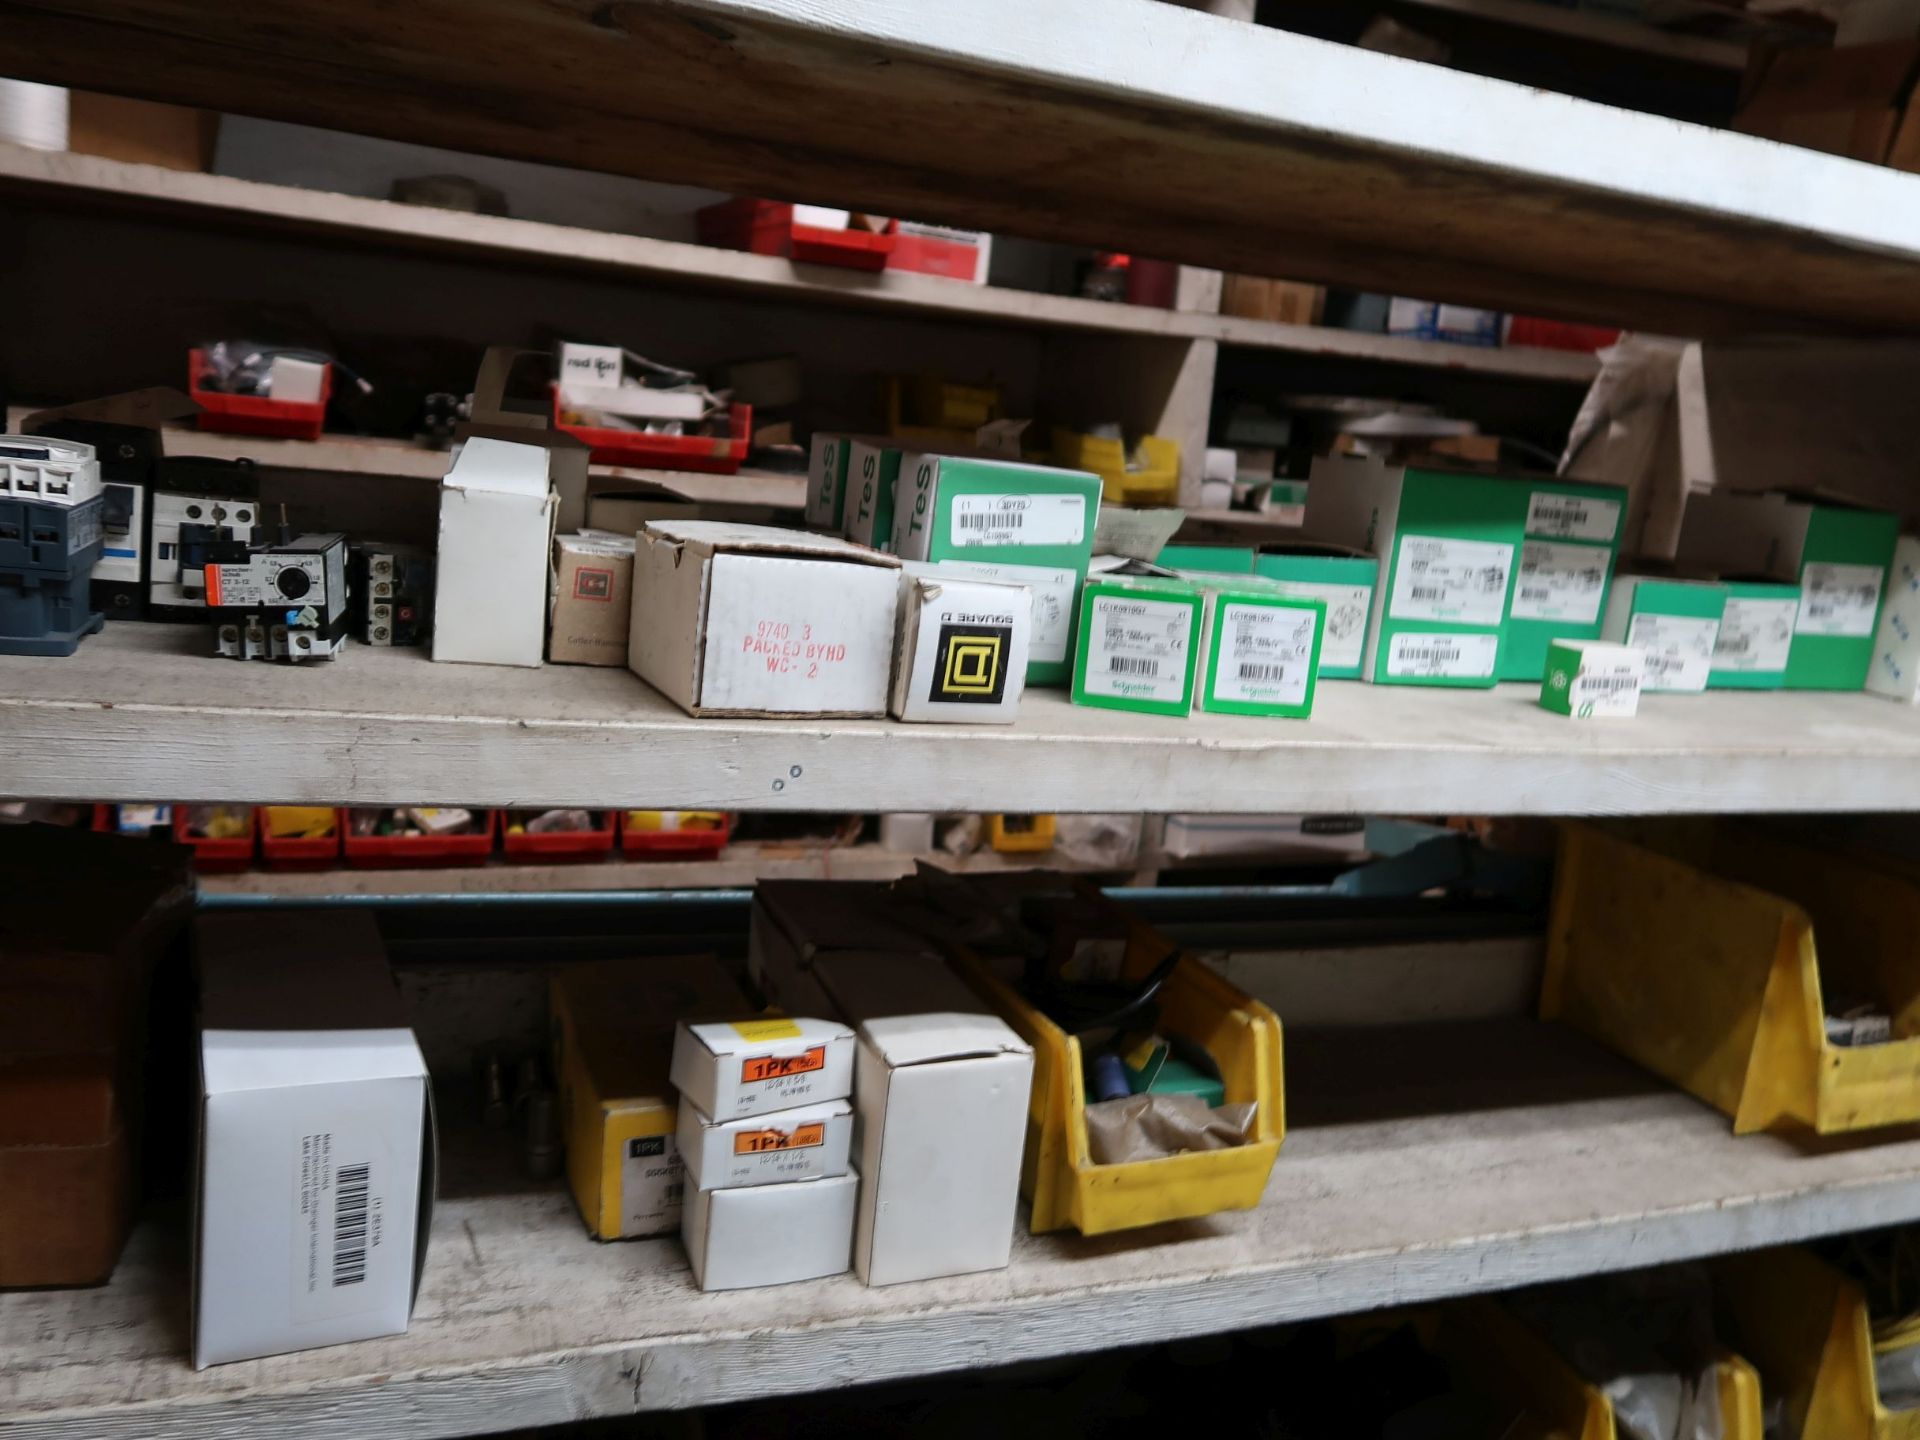 CONTENTS OF (3) SHELVES INCLUDING MACHINE PARTS, HARDWARE AND ELECTRICAL - Image 9 of 10